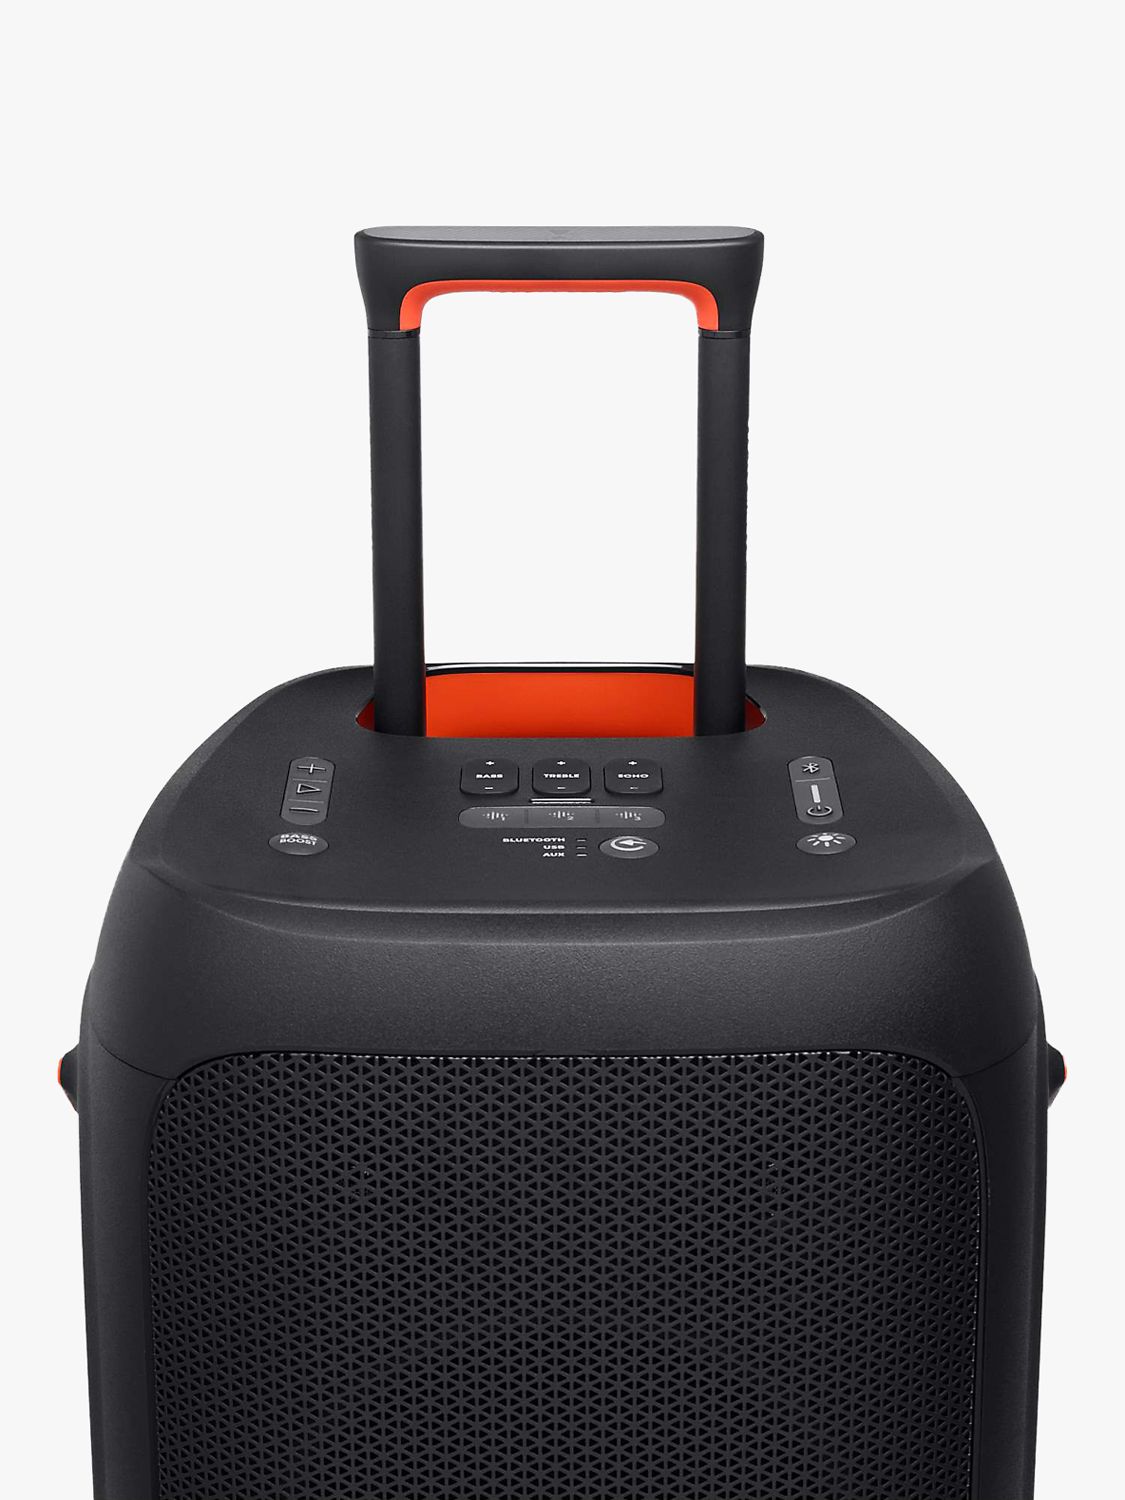 JBL PartyBox 310 Bluetooth Portable Speaker with Lights, Black